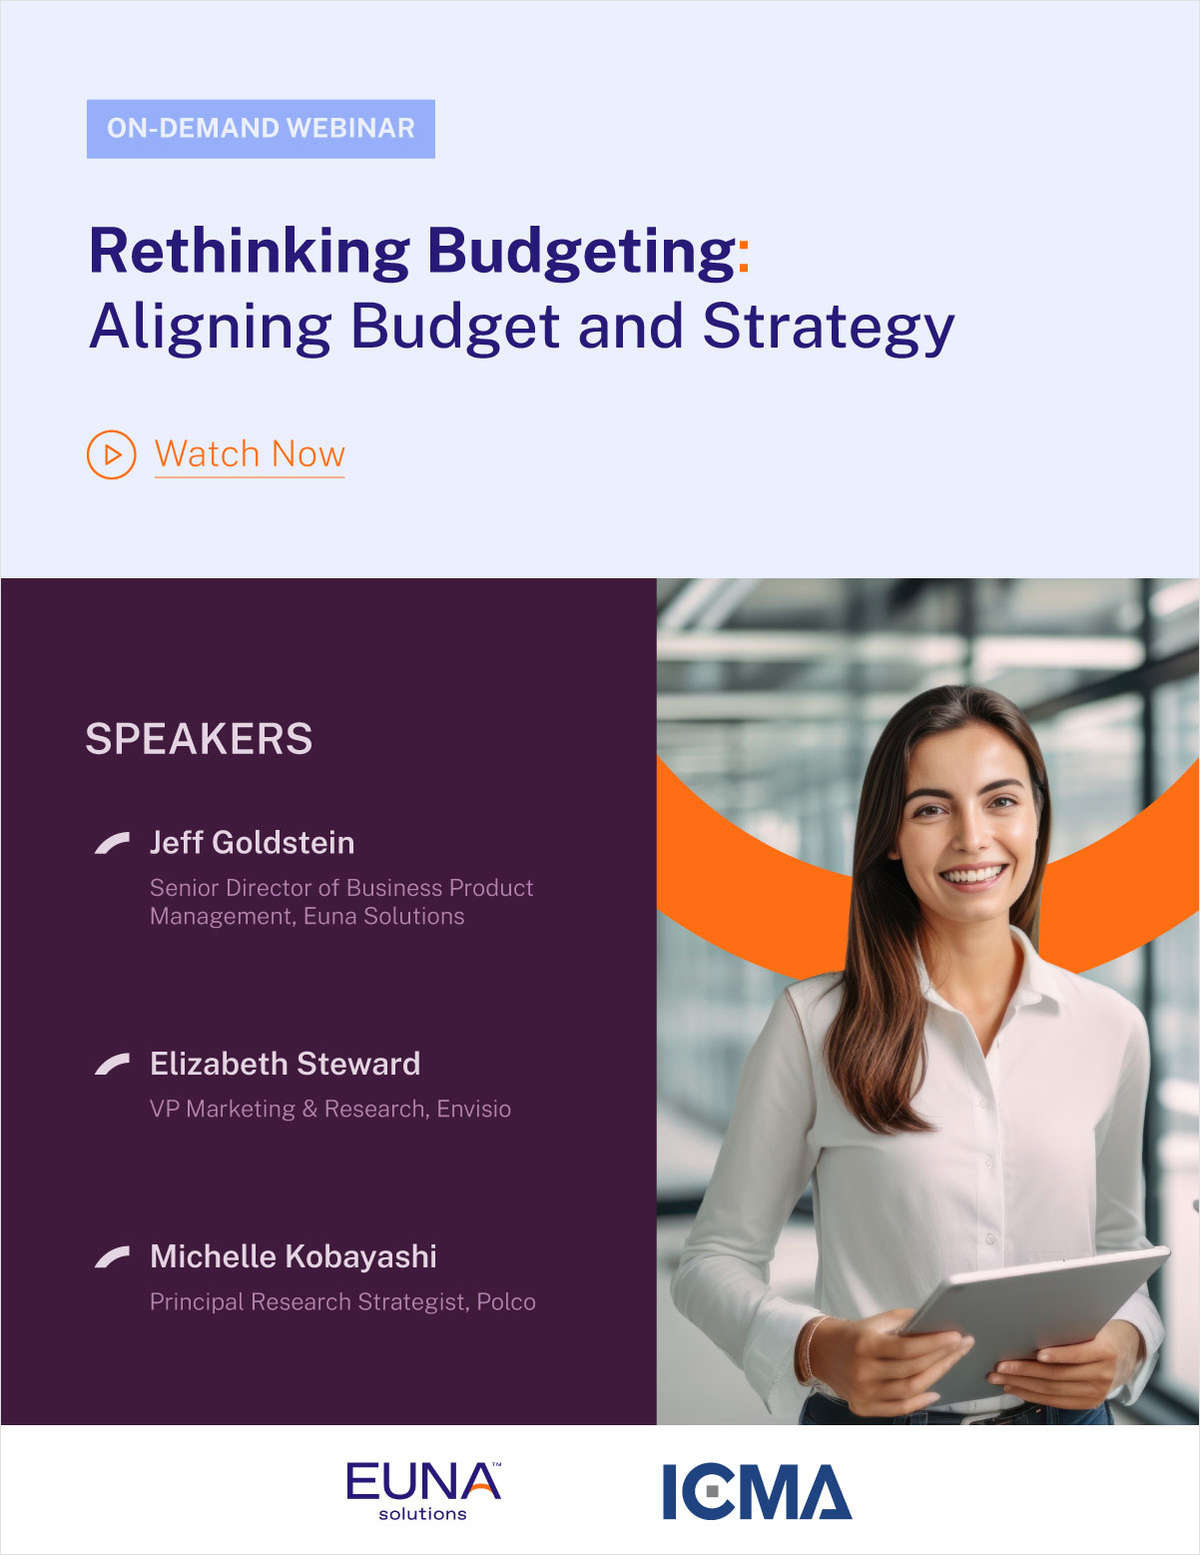 Rethinking Budgeting: Aligning Budget and Strategy